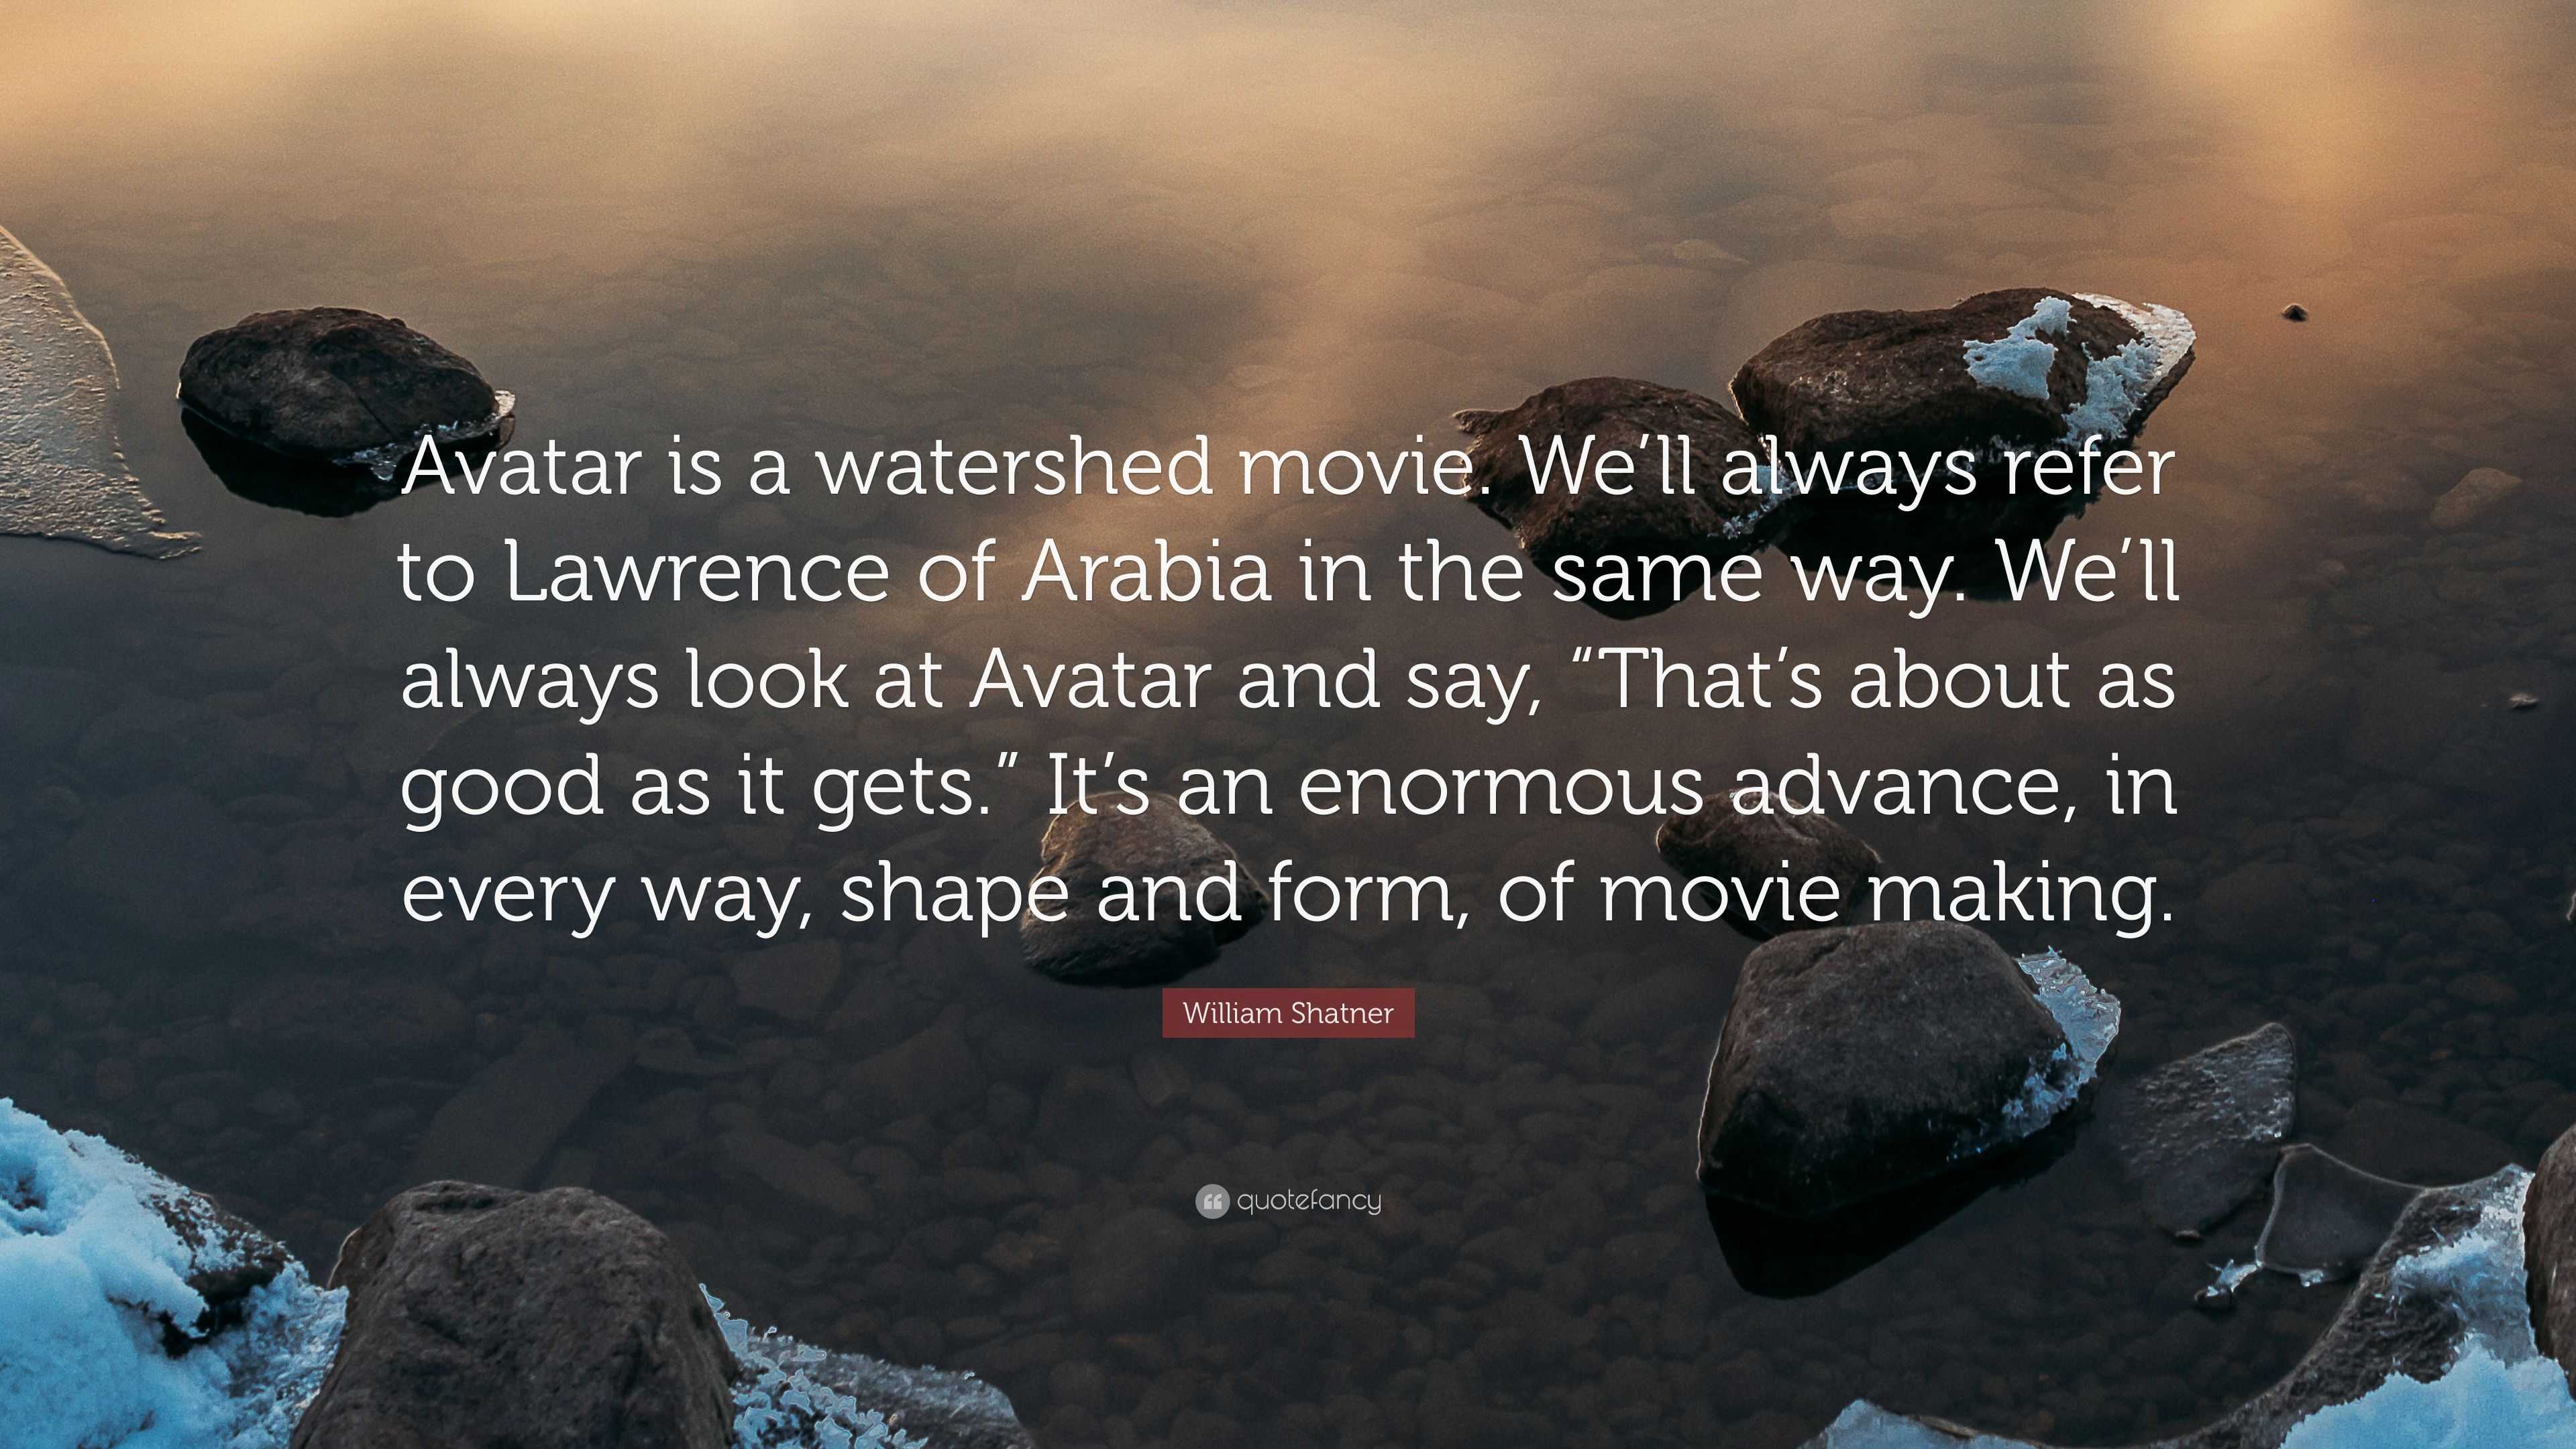 Quotes And Leadership Lessons From Avatar The Way Of Water